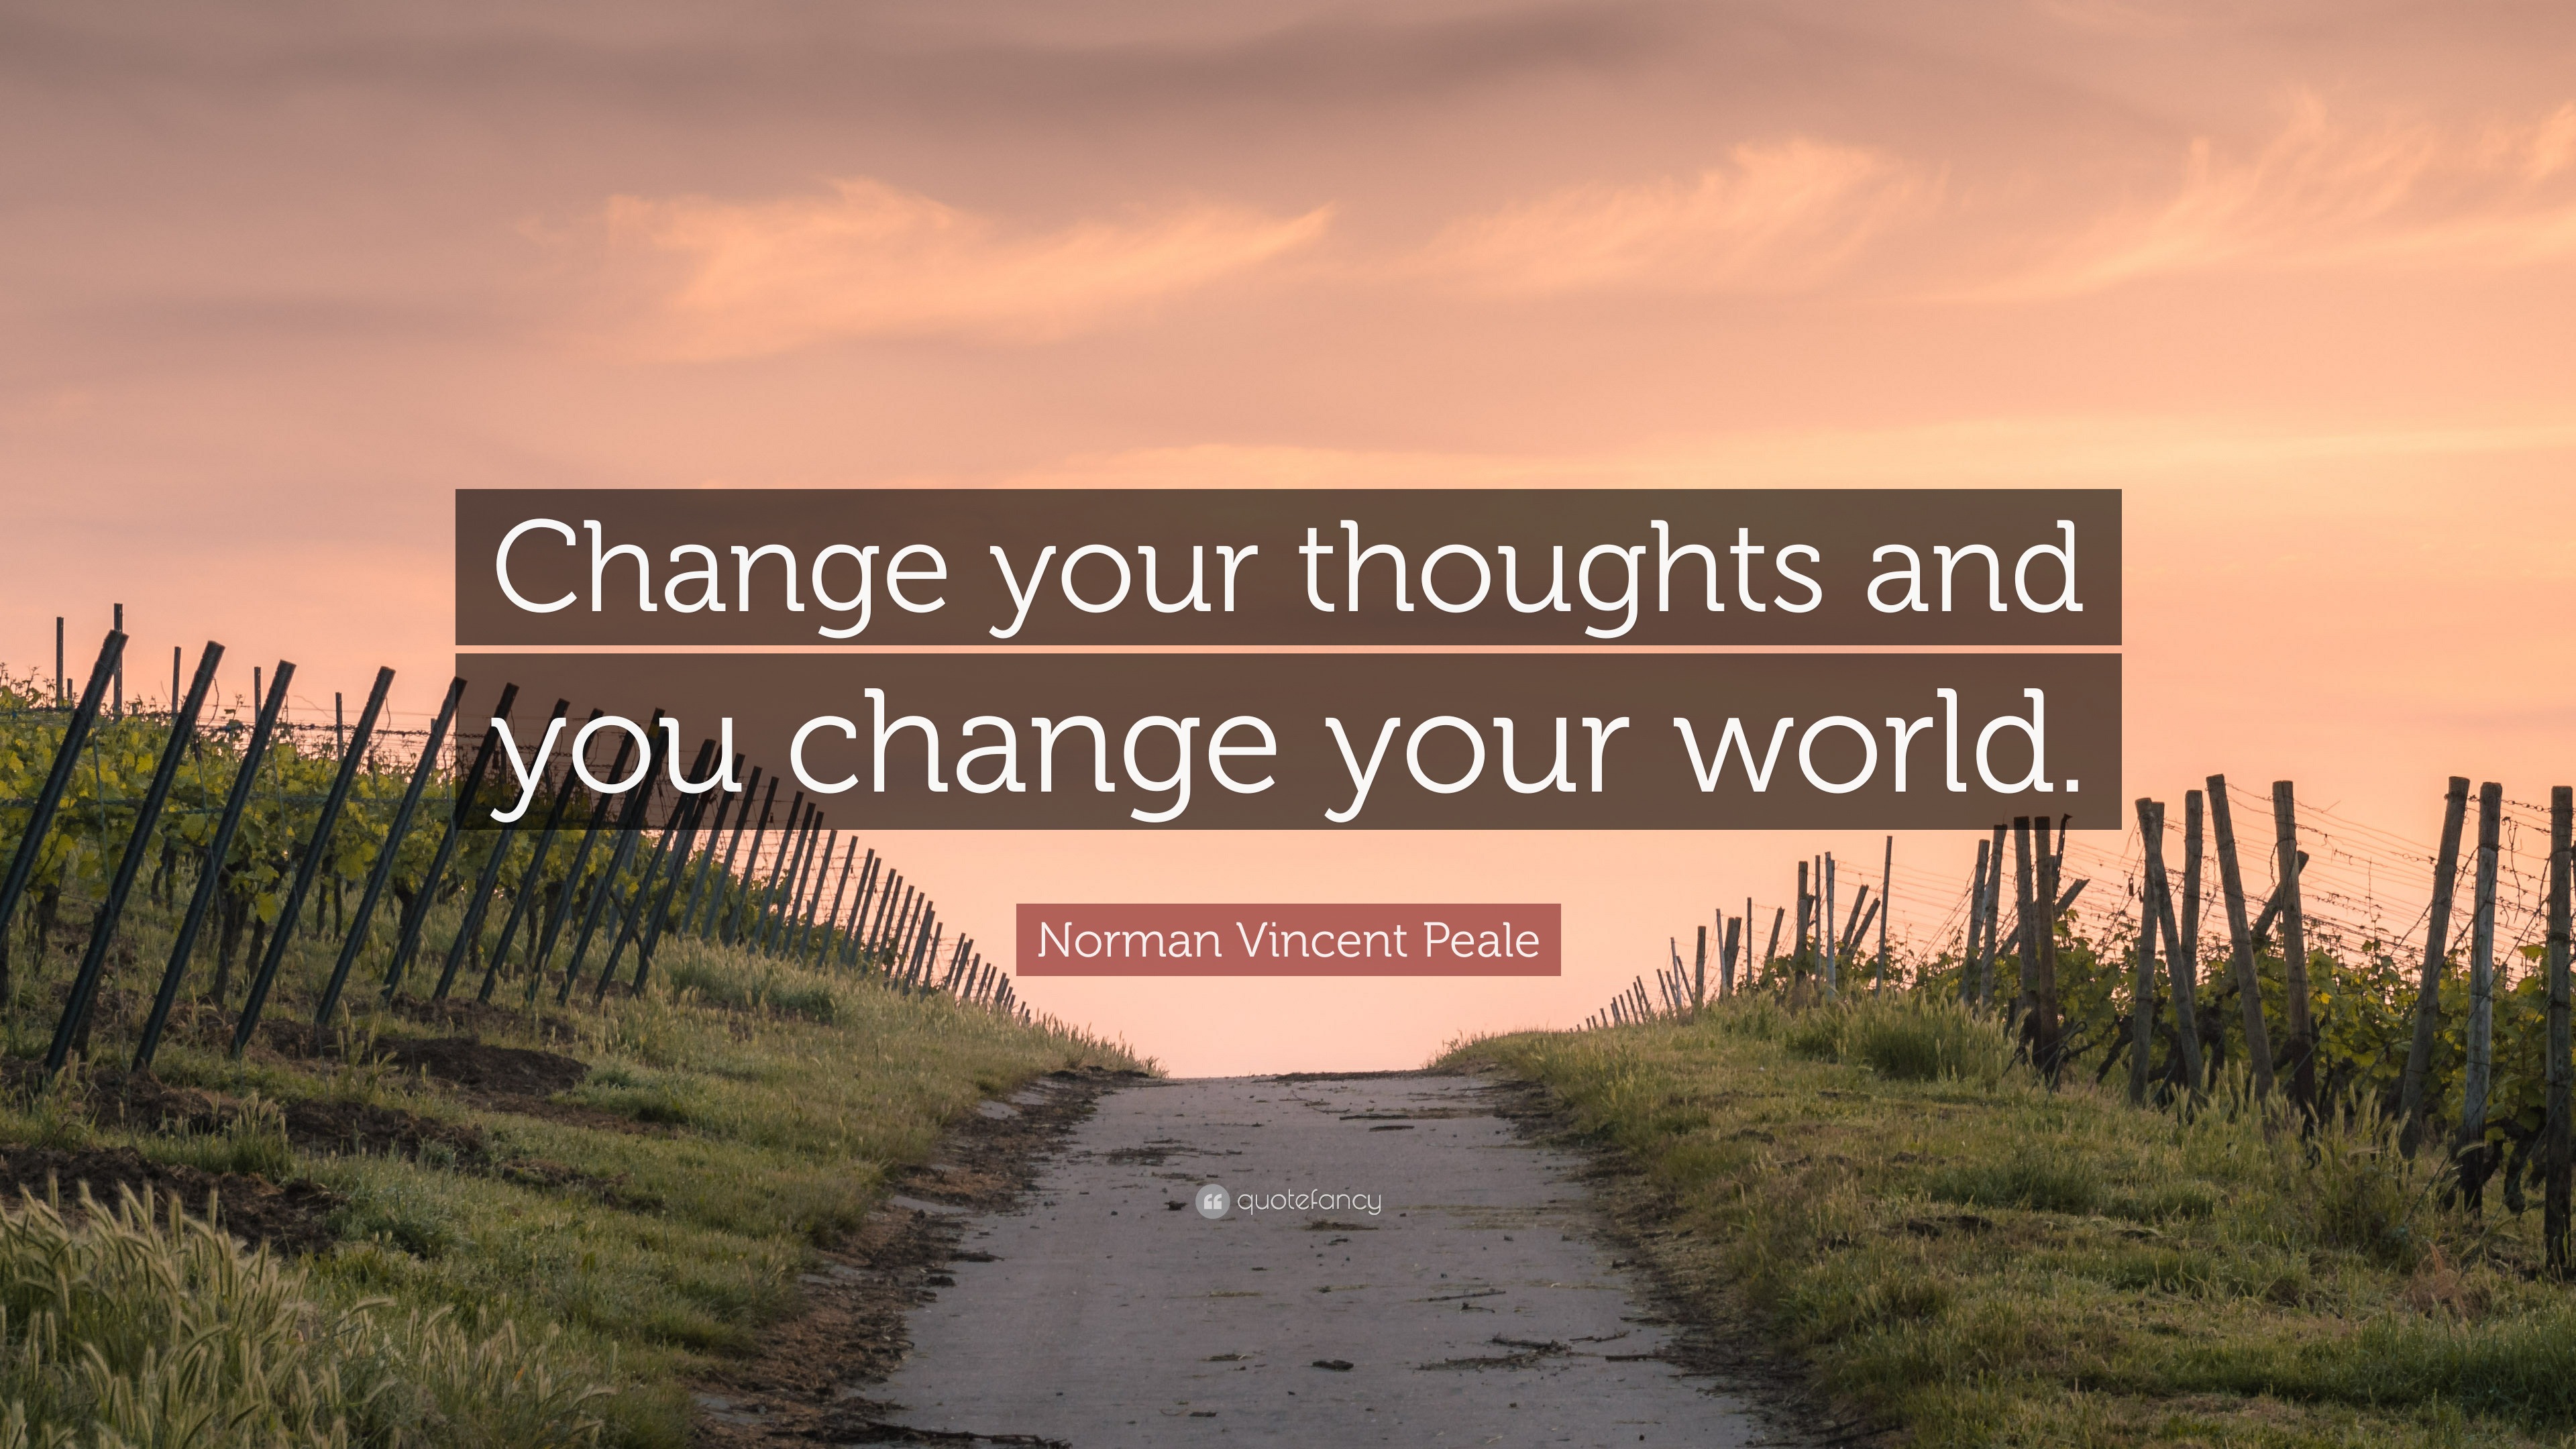 Norman Vincent Peale Quote: “Change your thoughts and you change your